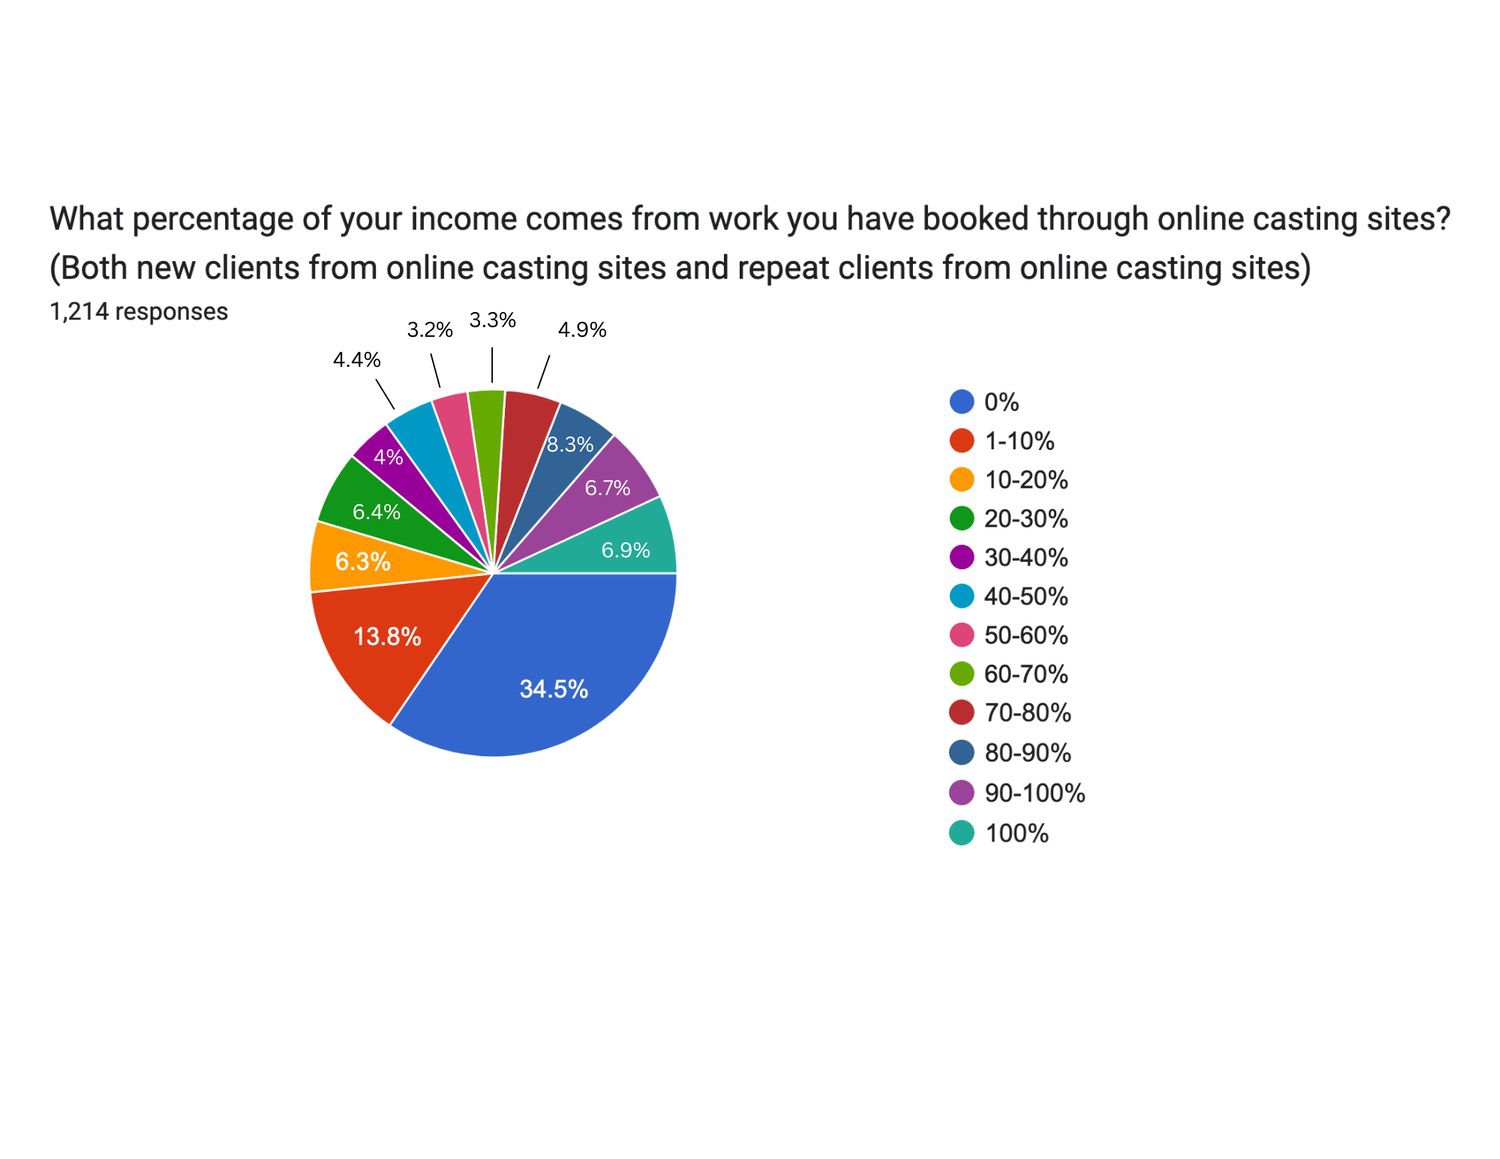 What percentage of your income comes from work you have booked through online casting sites?